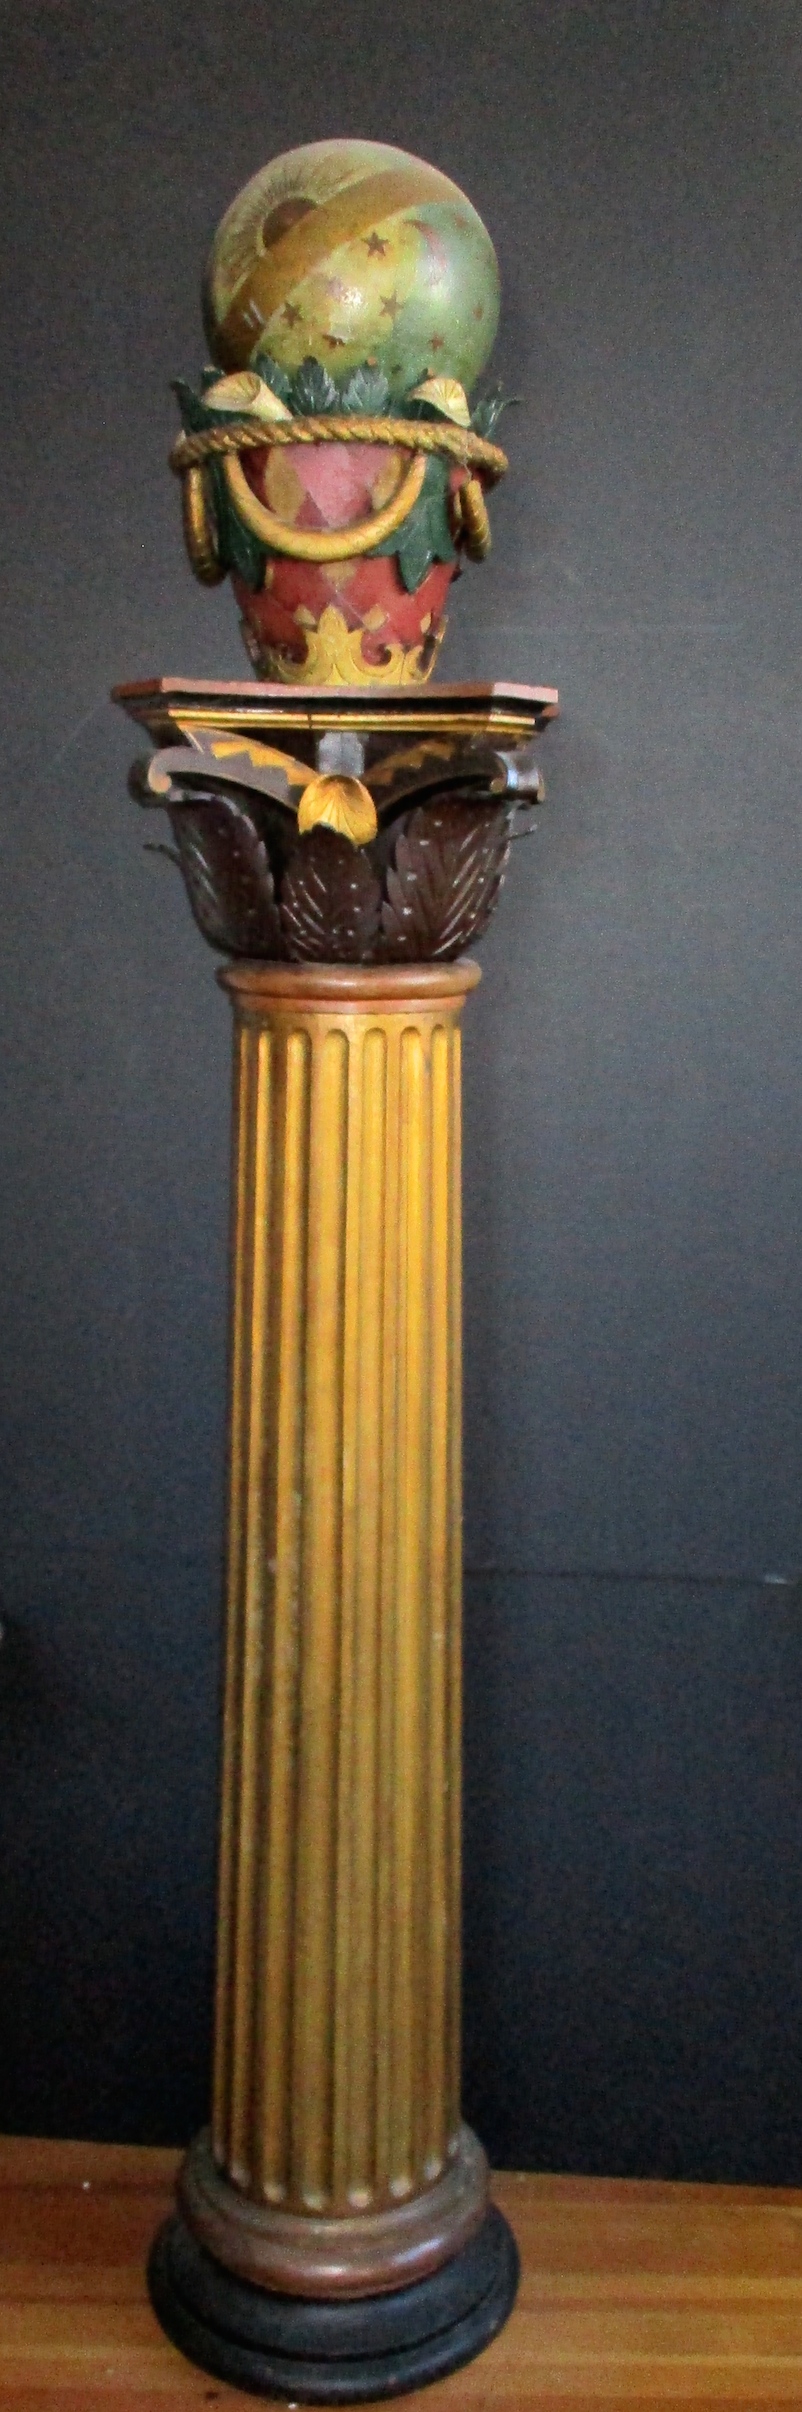 One of a Pair of 19th Century Hand-crafted Masonic Lodge Columns (This one with the Terrestrial Globe) (80" H x 18" Max. D)